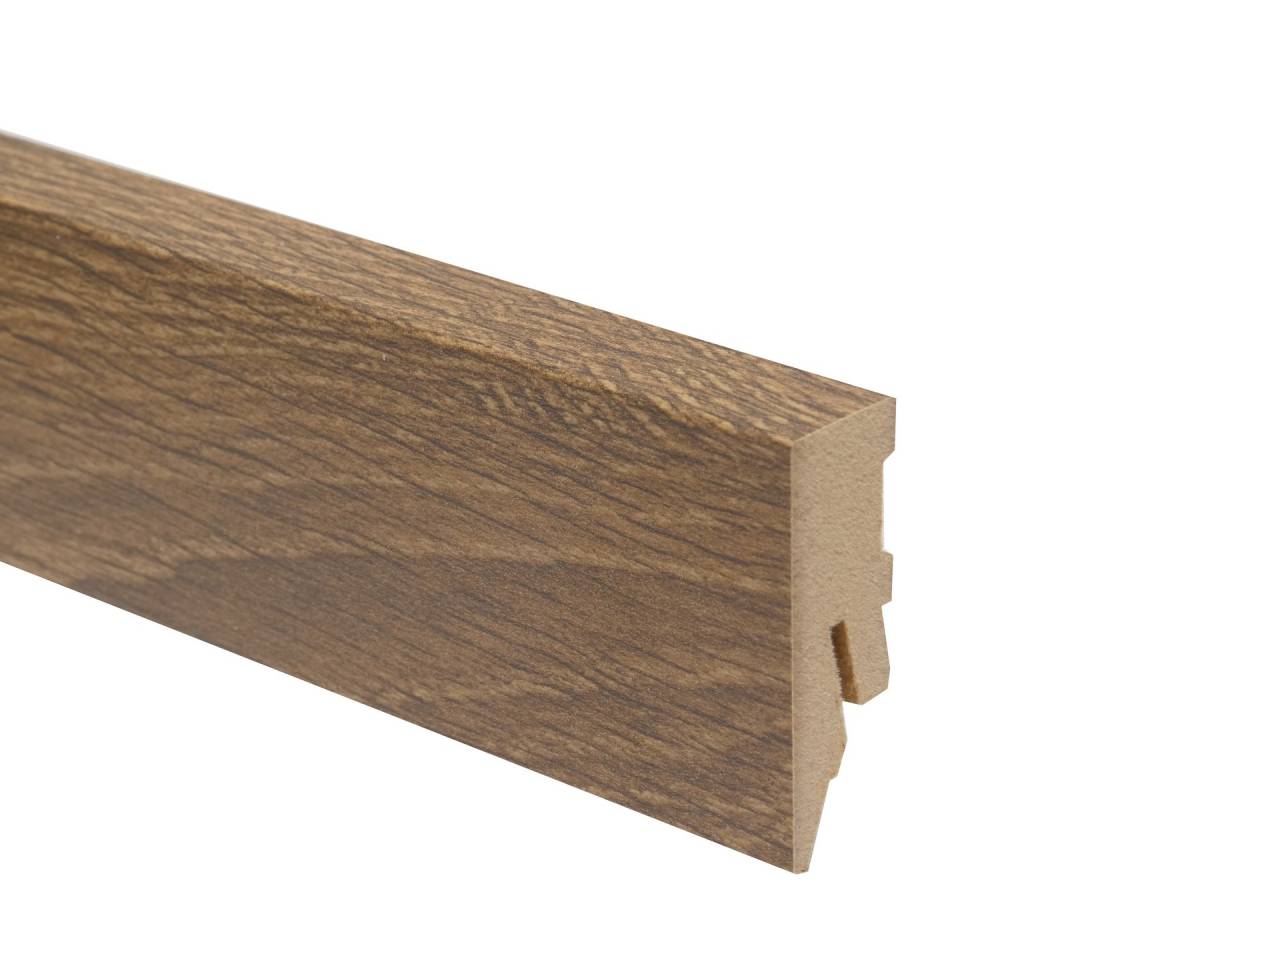 MDF wood floor skirting board 67235 with cable channel and height 50 mm. Suitable for laminate flooring in brown colour.